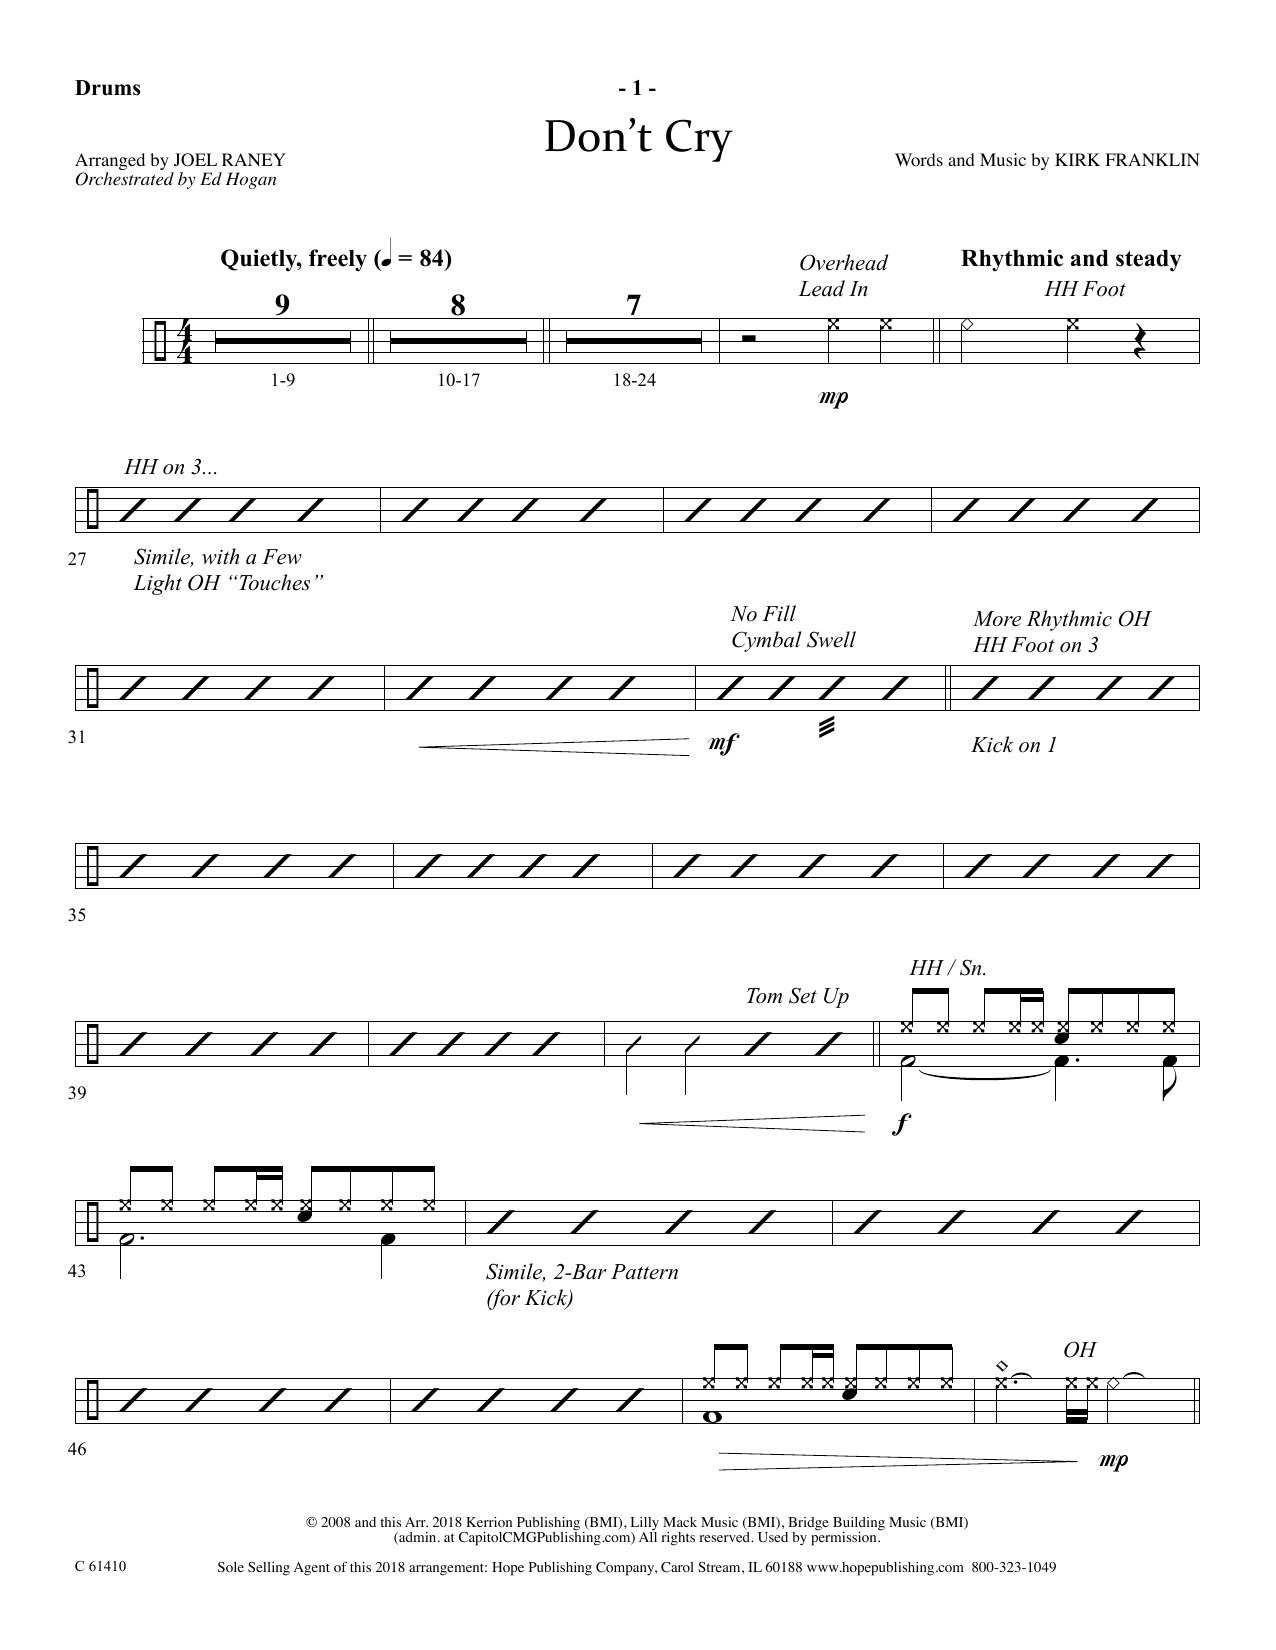 Download Joel Raney Don't Cry - Drums Sheet Music